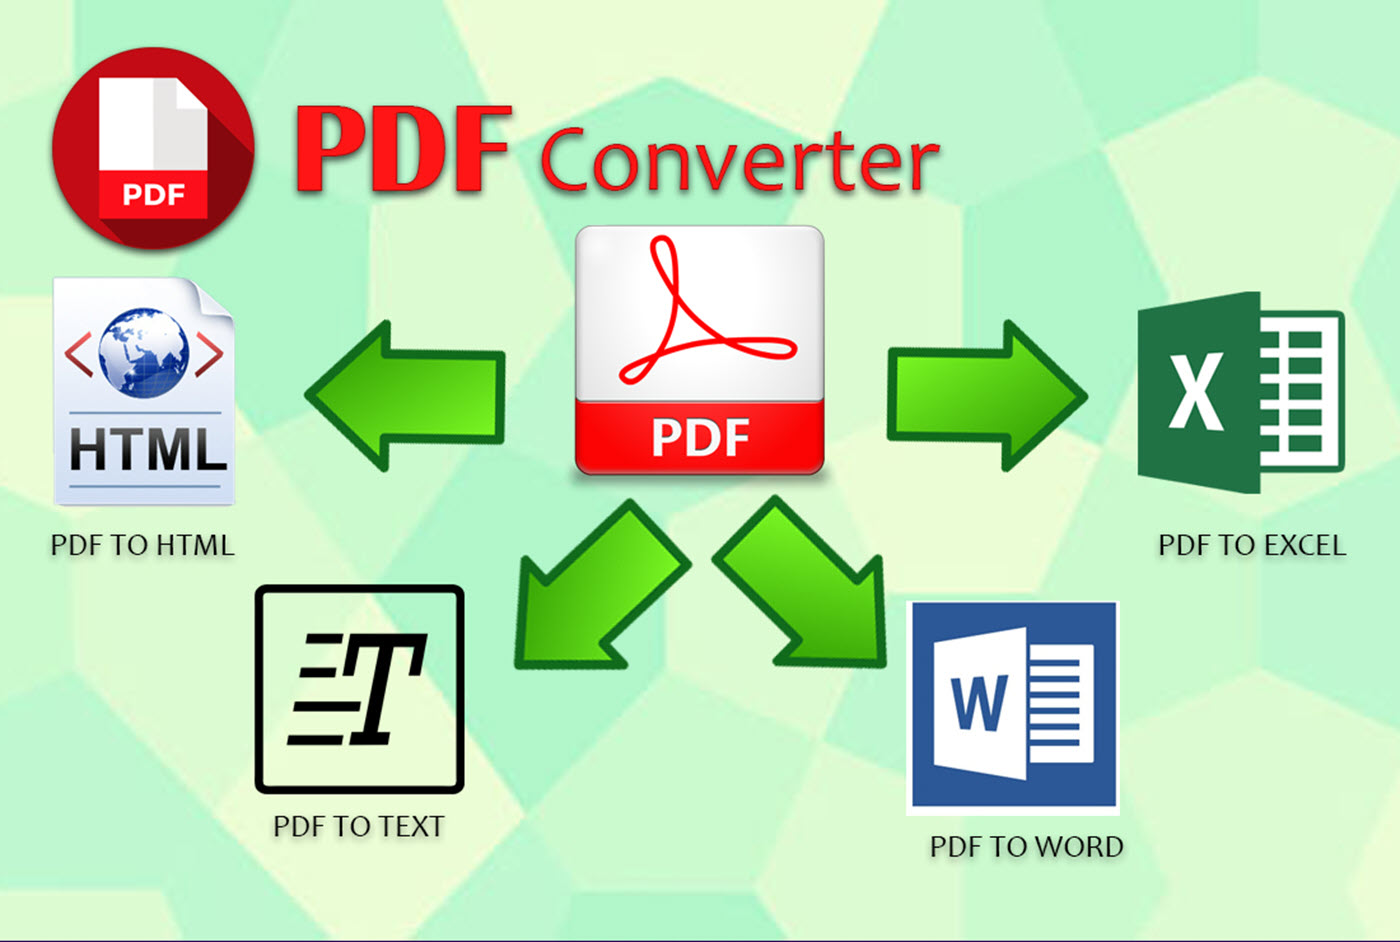 A New Level of Readiness: Convert Your Erotic Stories to PDF with Word Pad Converter